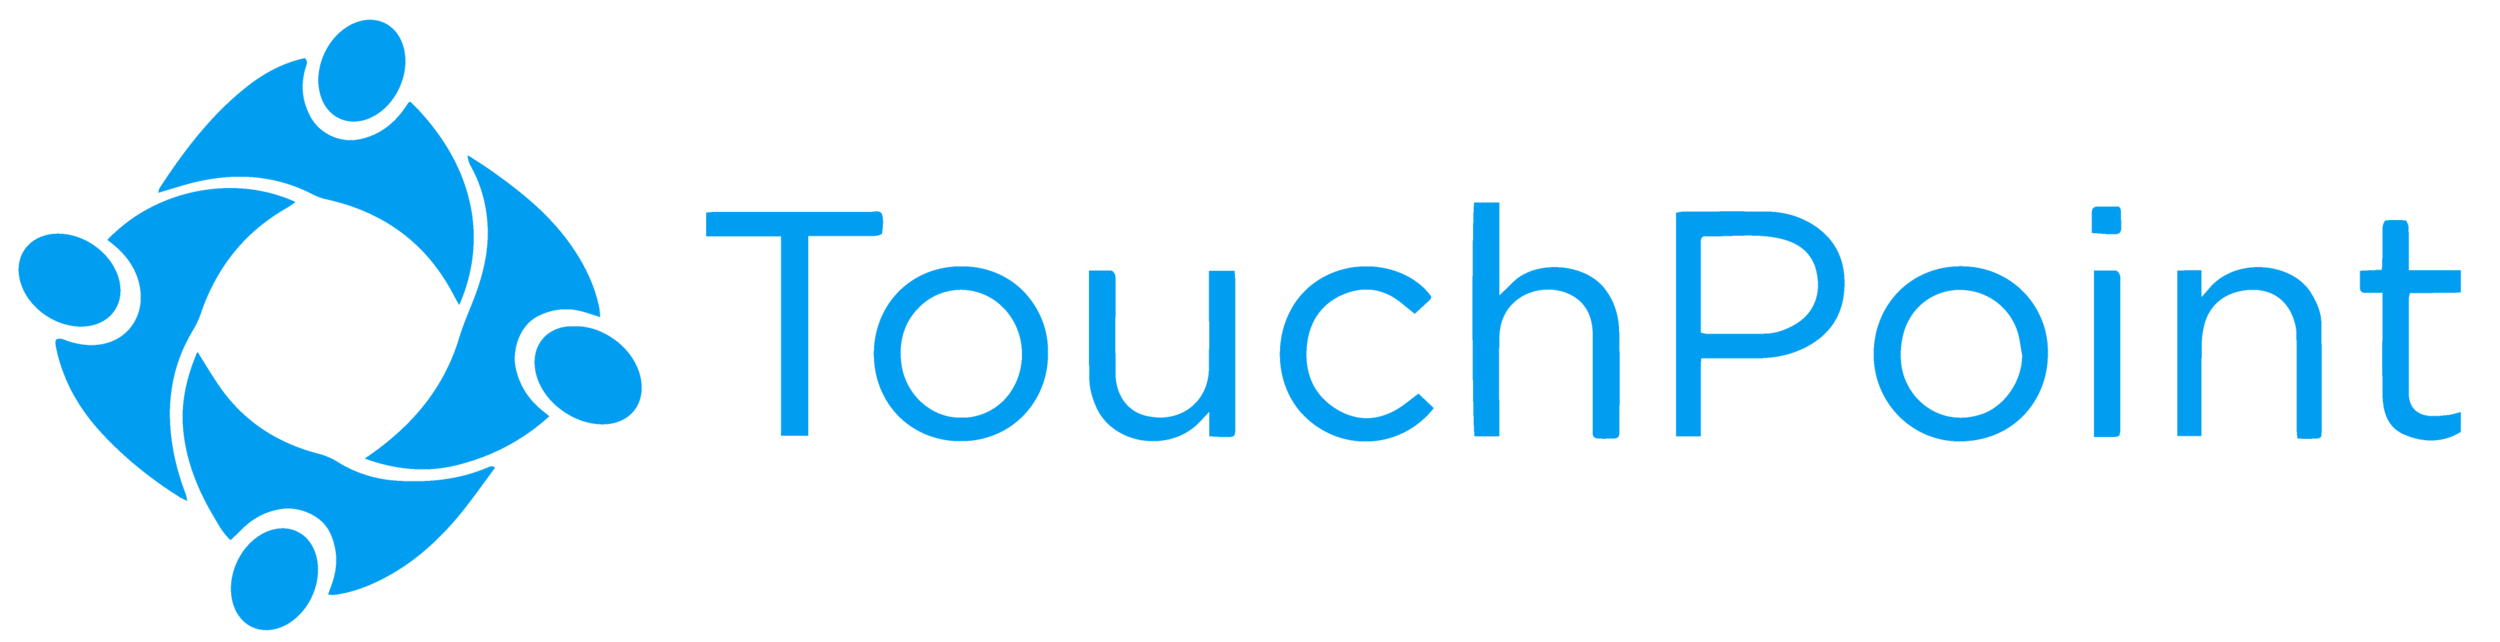 TouchPointLogo.png